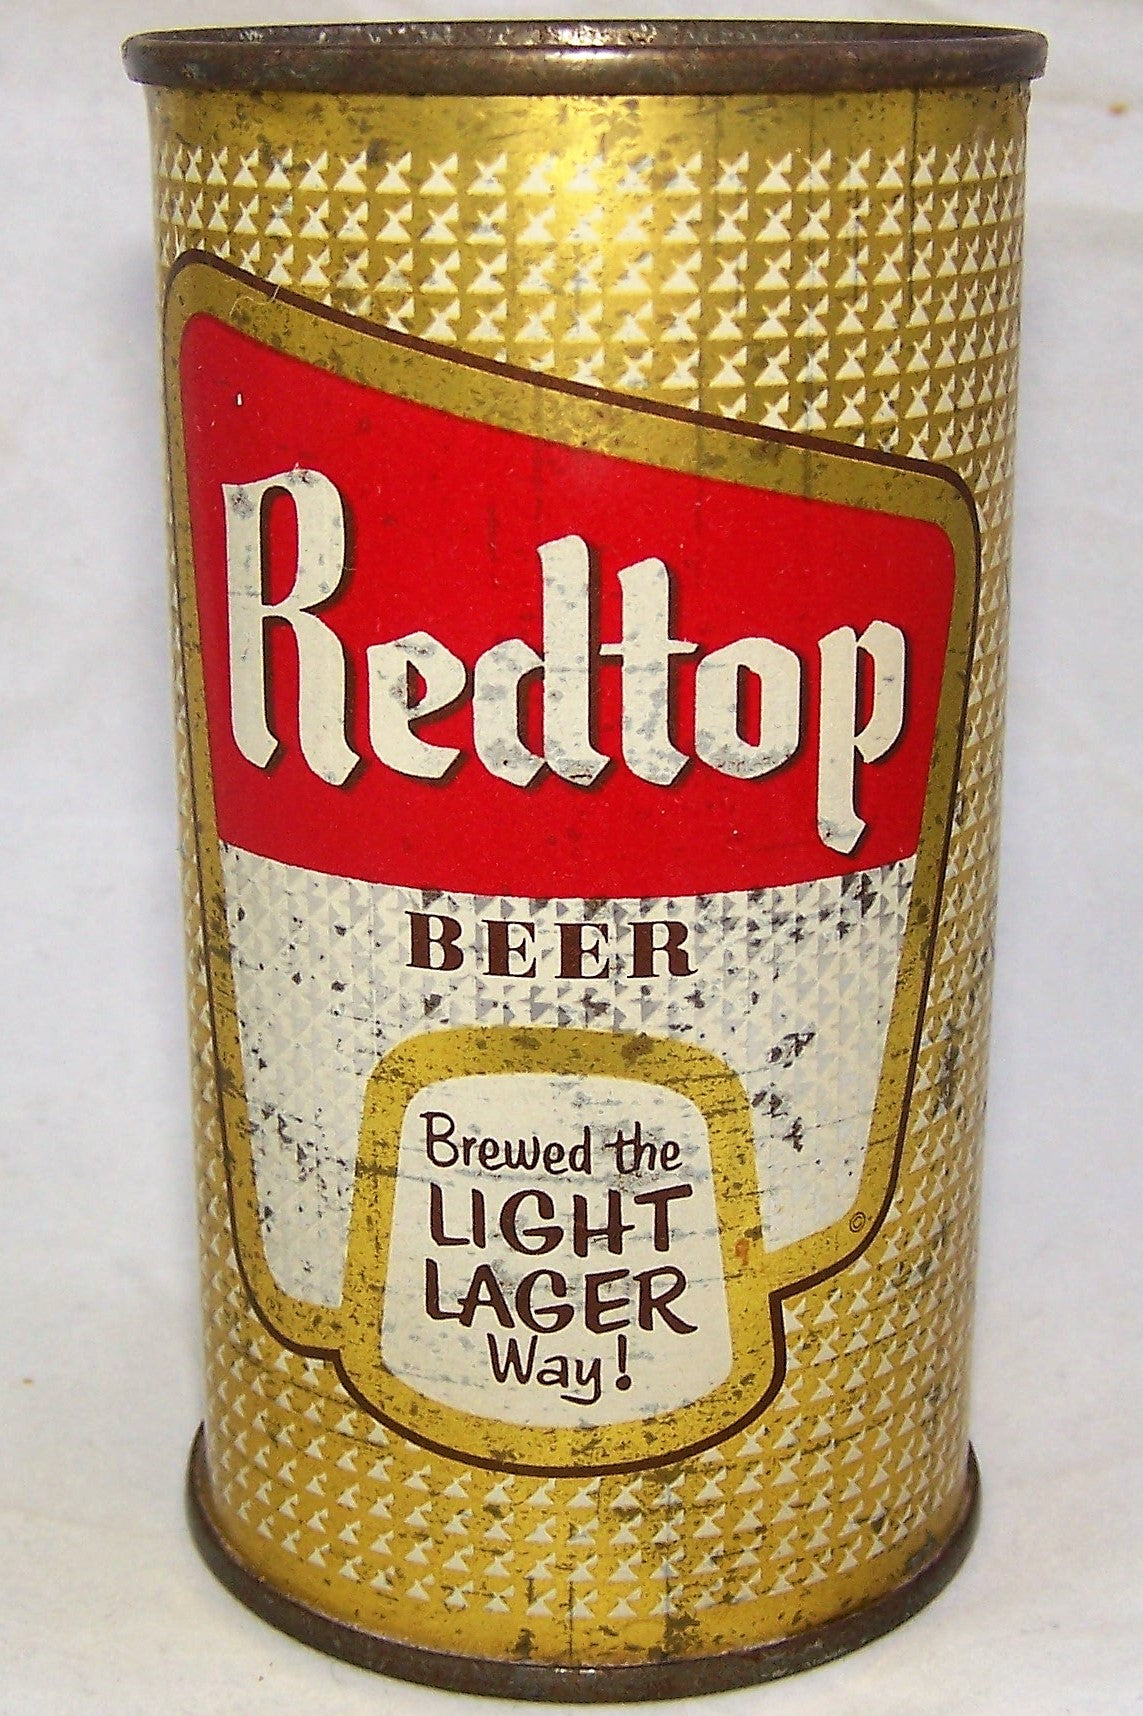 Red Top "Brewed The Light Lager Way"